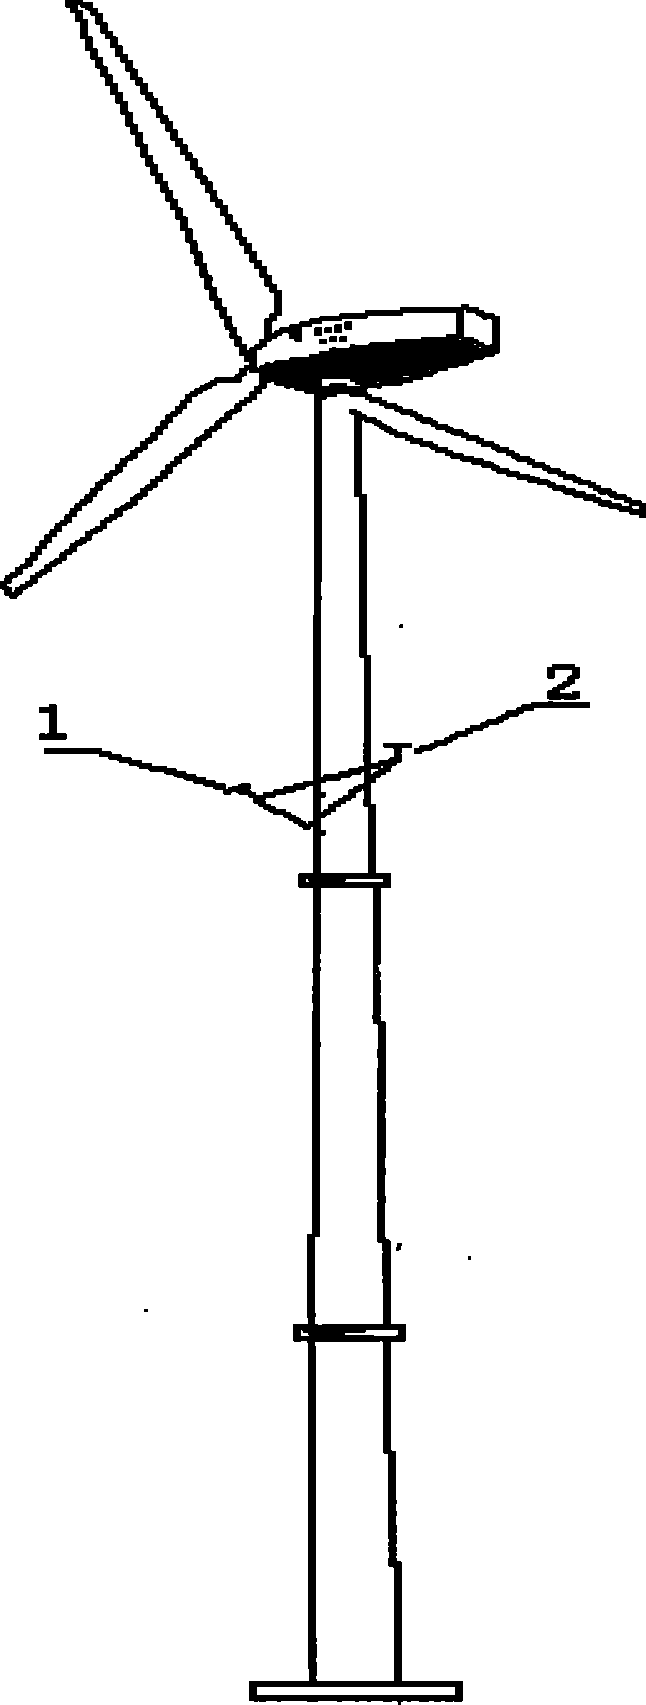 Wind speed and wind direction measuring method for wind power generation system